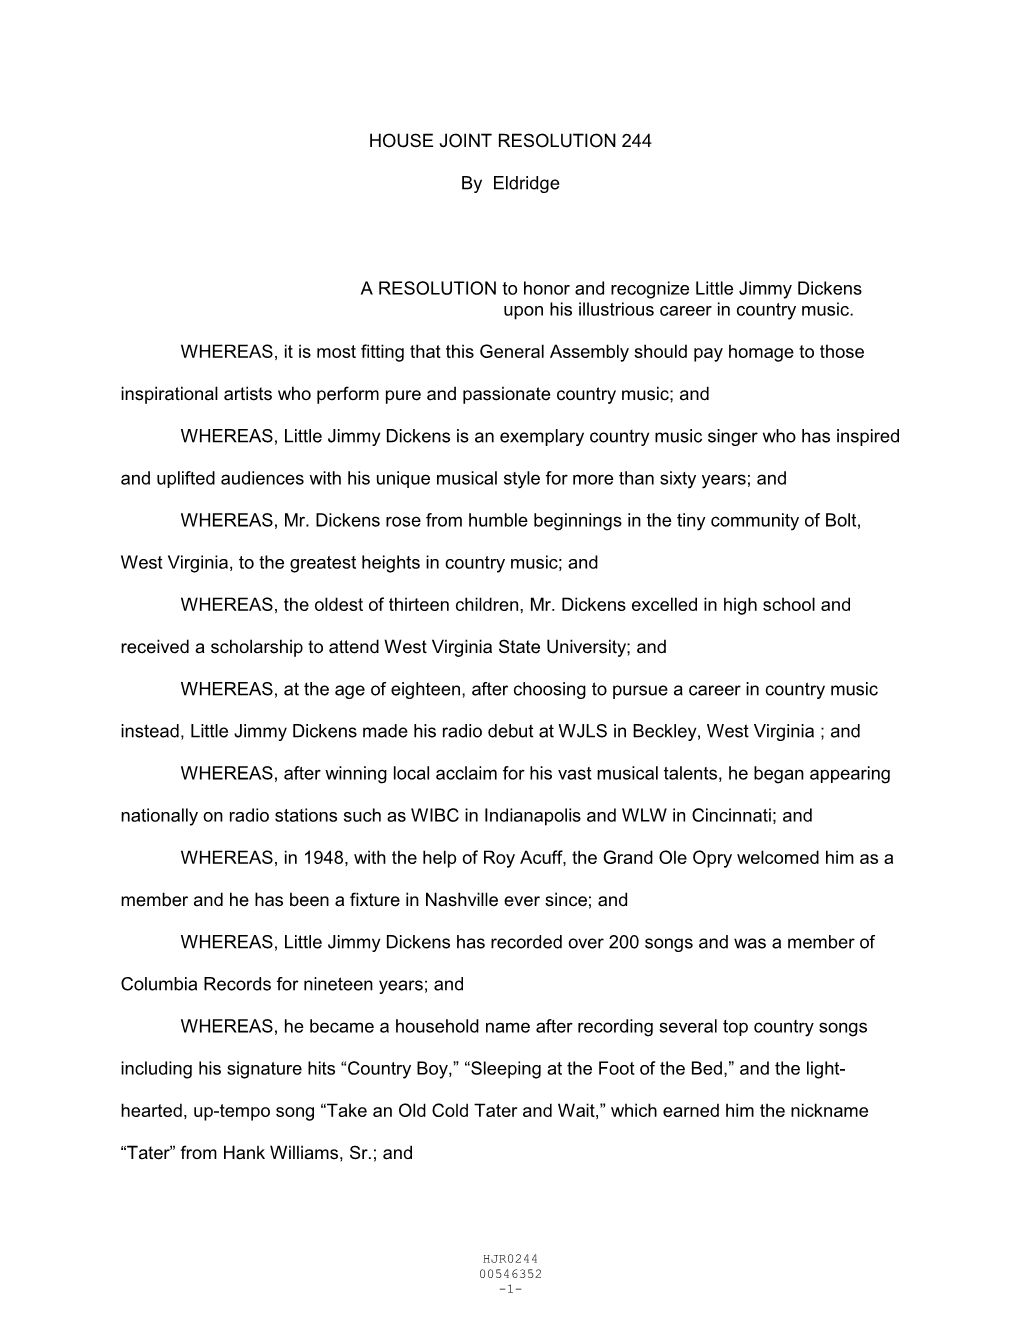 HOUSE JOINT RESOLUTION 244 by Eldridge a RESOLUTION to Honor